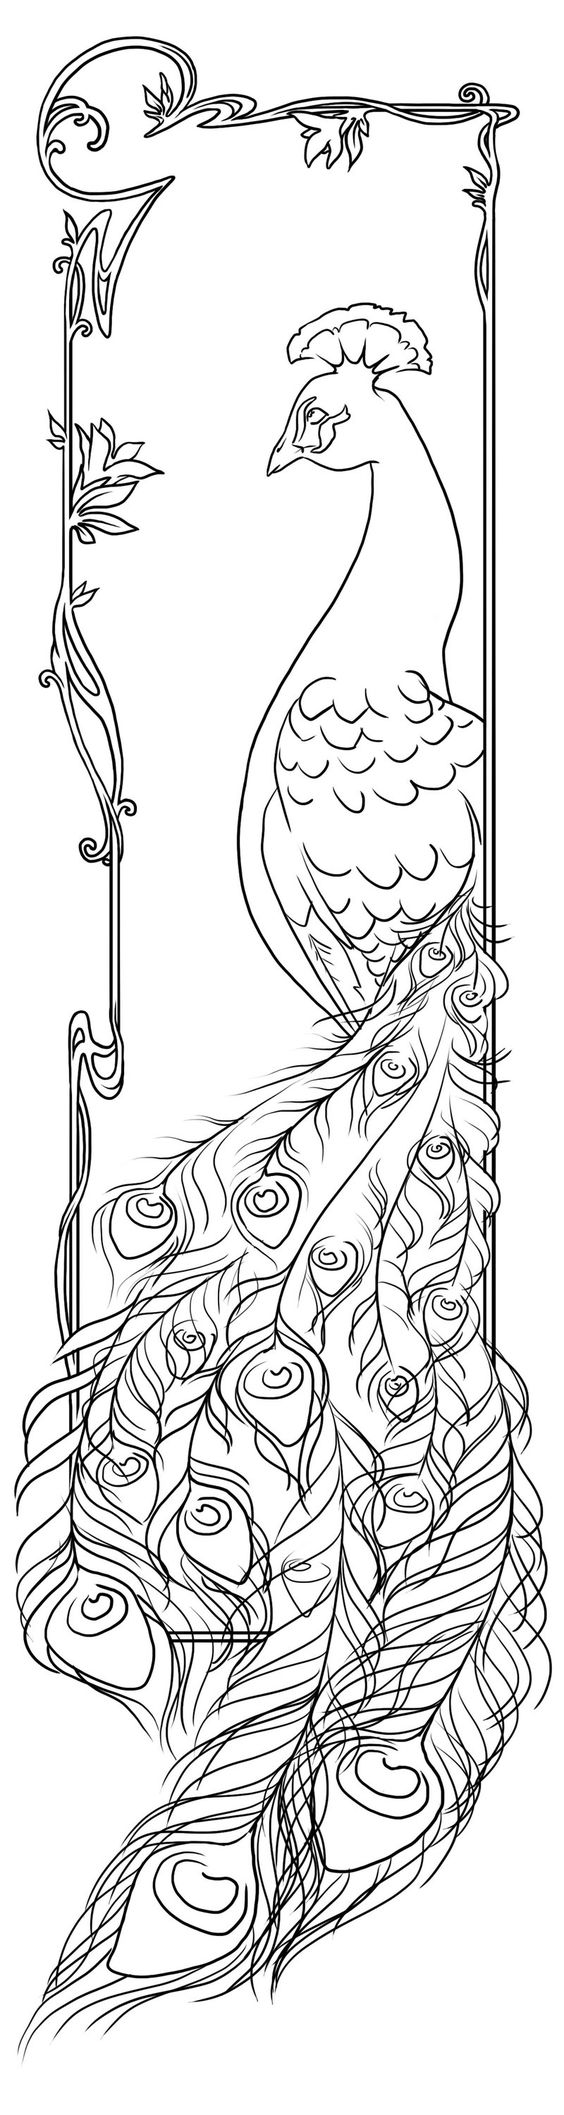 Awesome uncolored peacock in a frame tattoo design